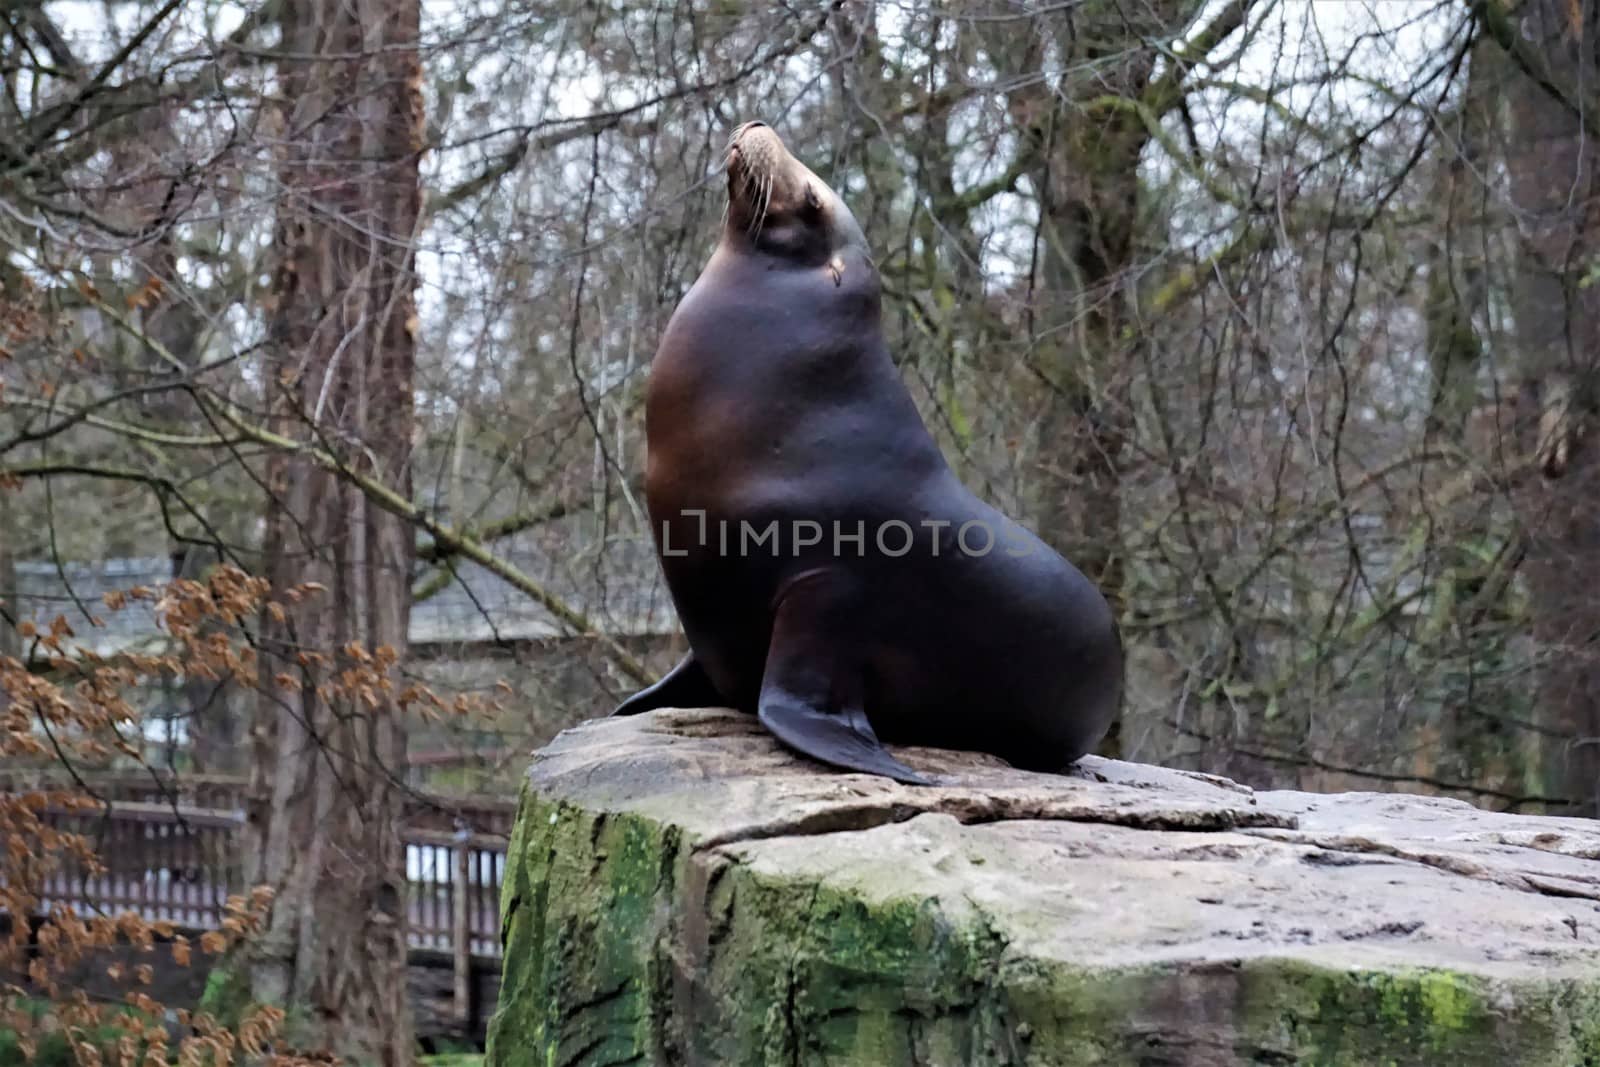 California sea lion looking cute while chilling on rock by pisces2386